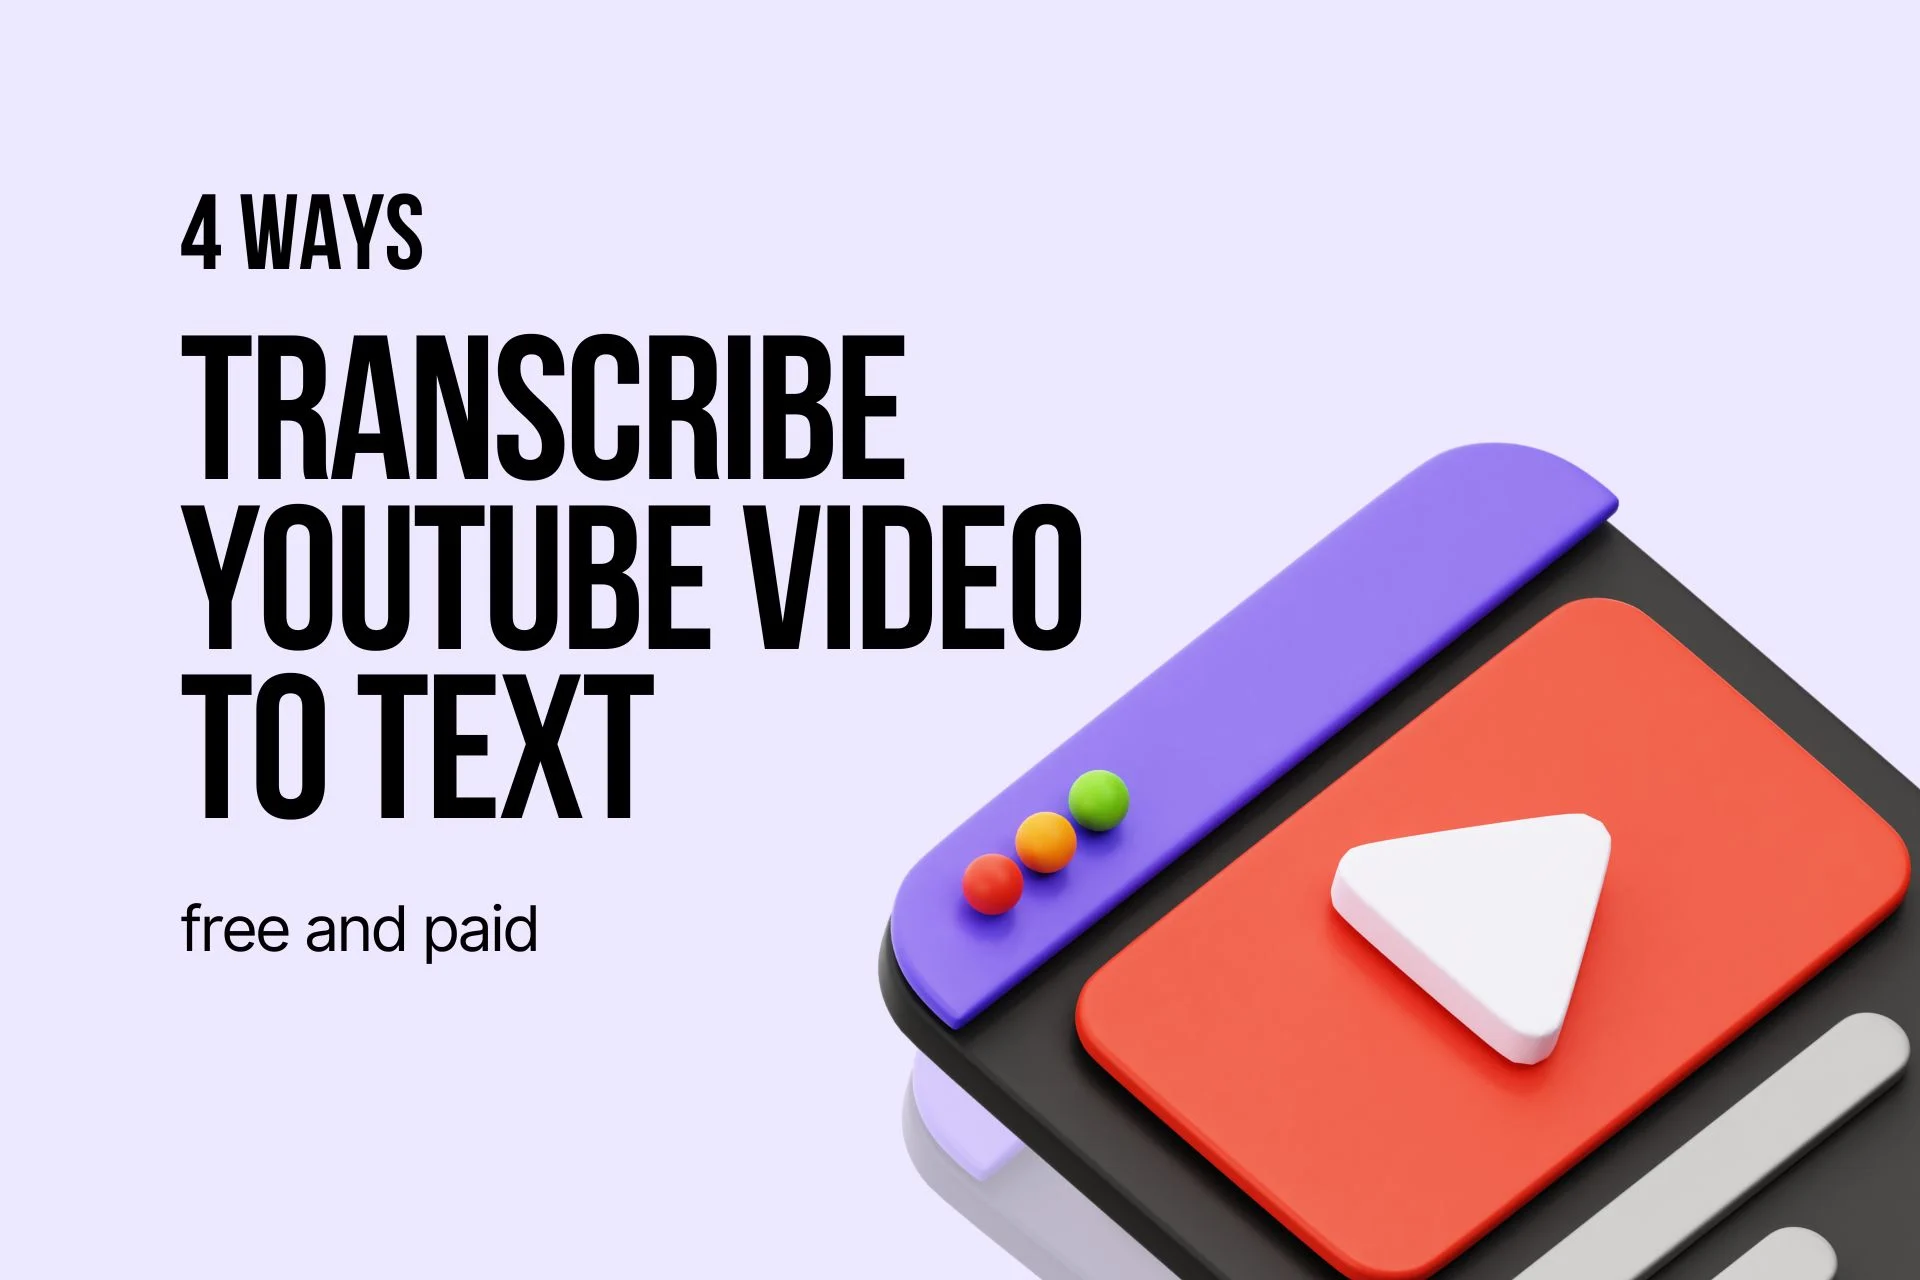 the title "4 ways to transcribe YouTube video to text-free and paid" on the left, and on the right, there is a 3d illustration of a window with YouTube play icon on it